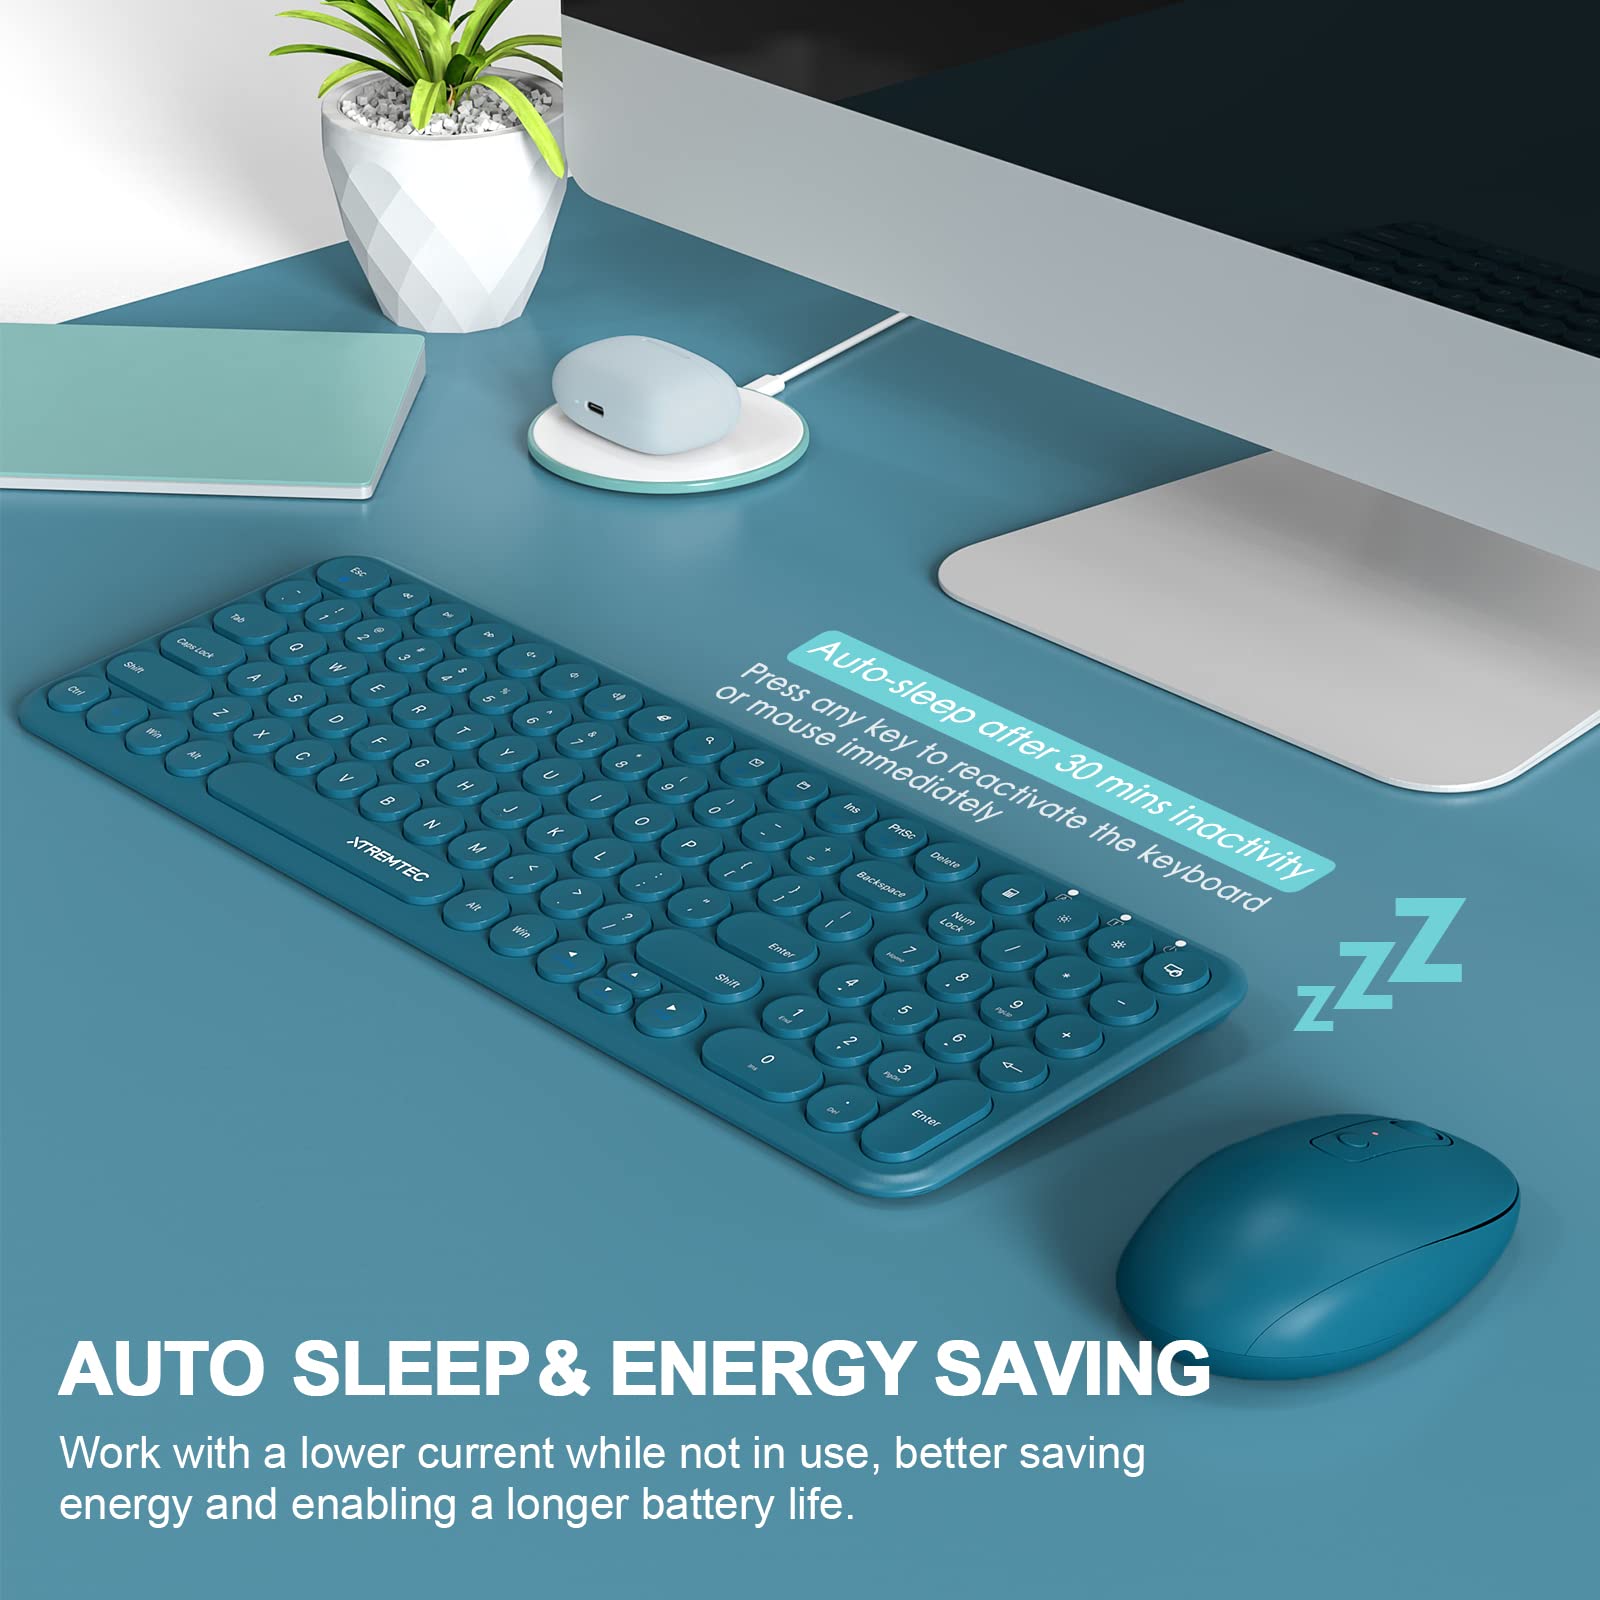 XTREMTEC Slim Wireless Keyboard and Mouse Combo, 2.4G USB Quiet Low-Profile Retro Round Typewriter Computer Keyboard and Ergonomic Mouse Set for Windows Laptop/PC/iMac/Computer, Plug-and-Play (Blue)